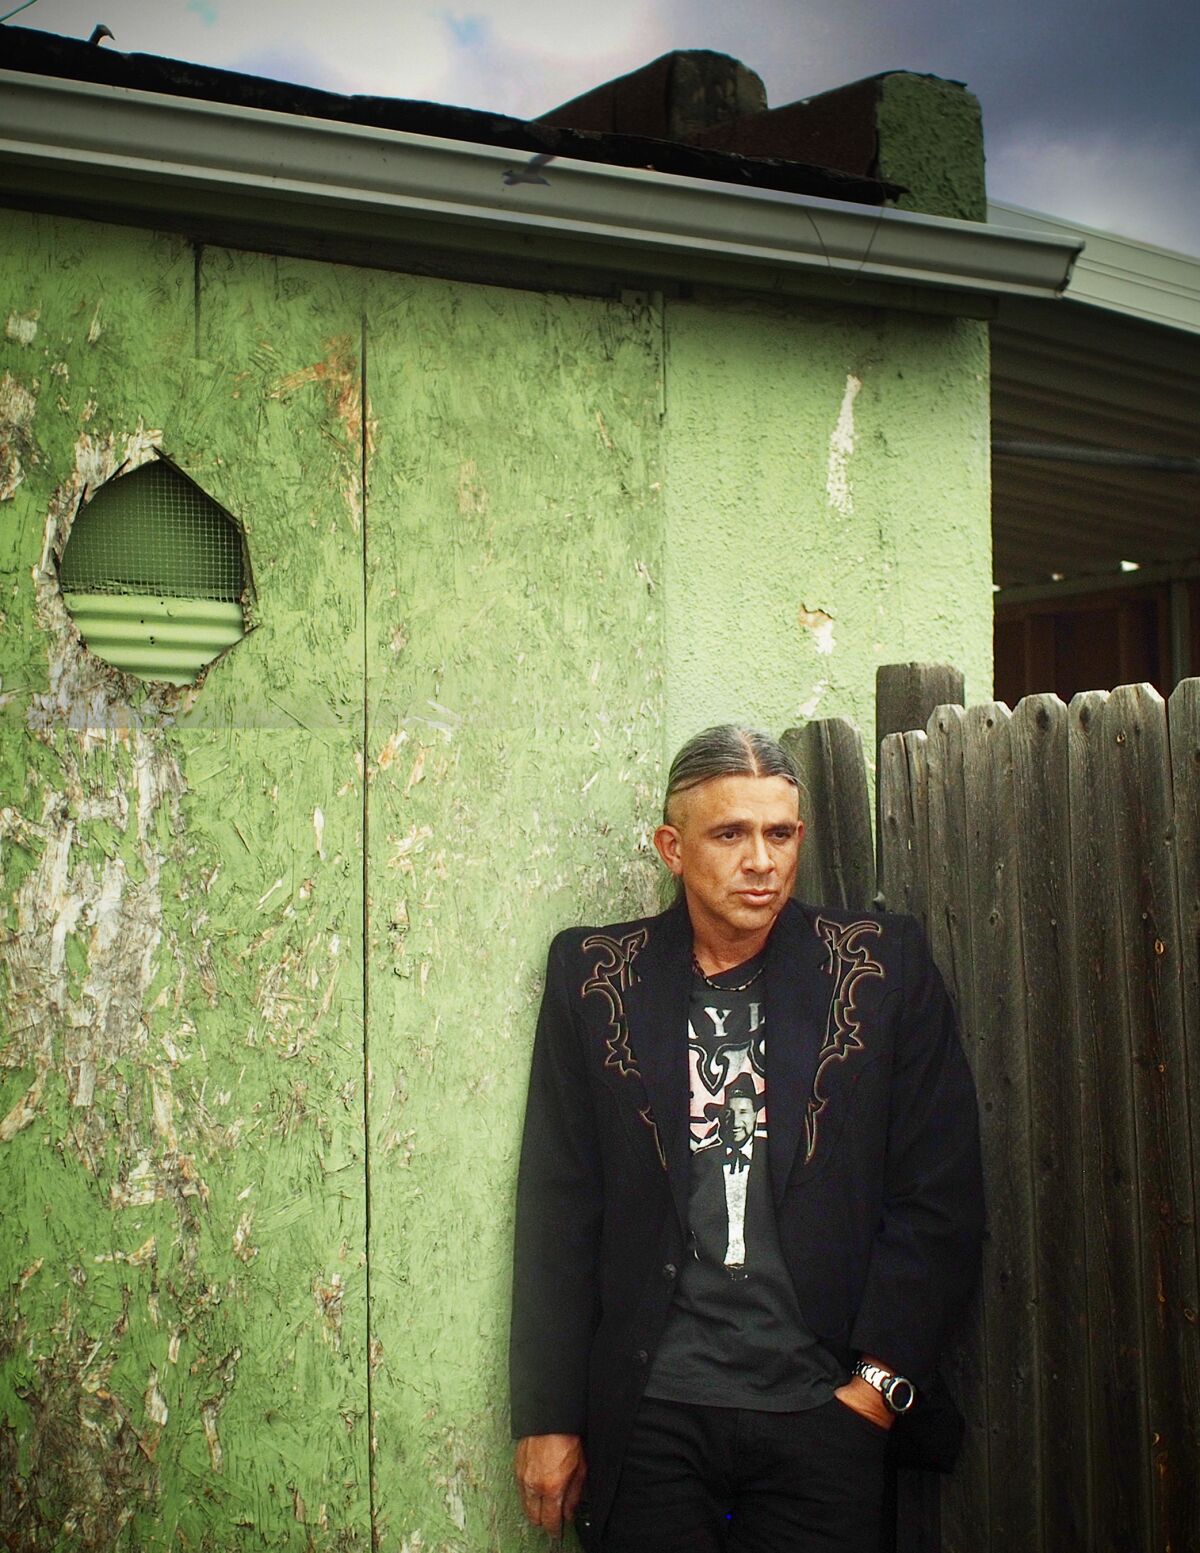 A man in an embellished jacket stands against a fence and an old building